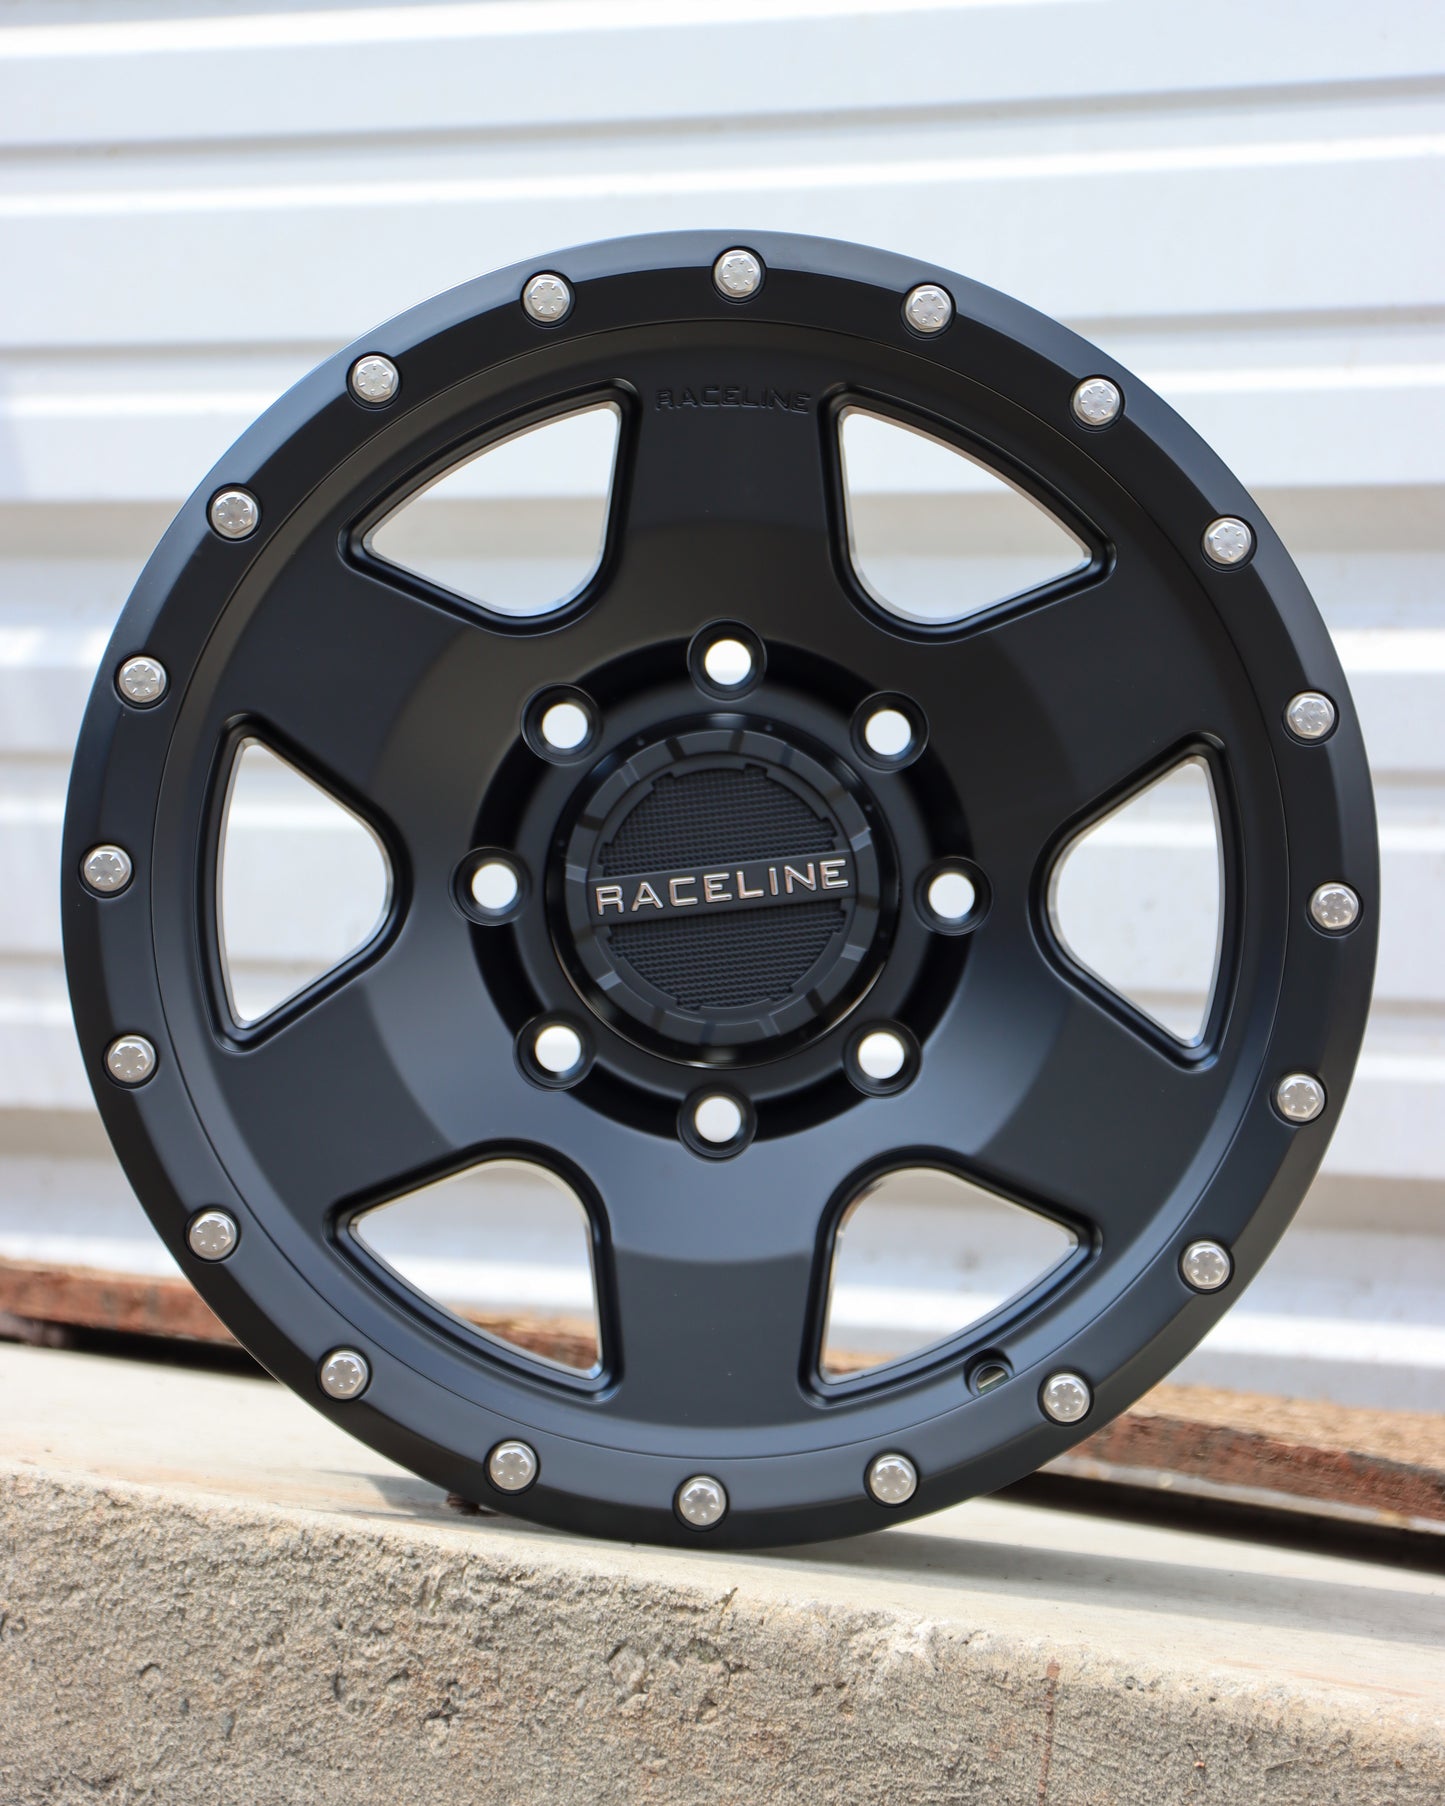 Raceline Boost wheel in a matte black finish sitting on some concrete with a metal sheet in the background.